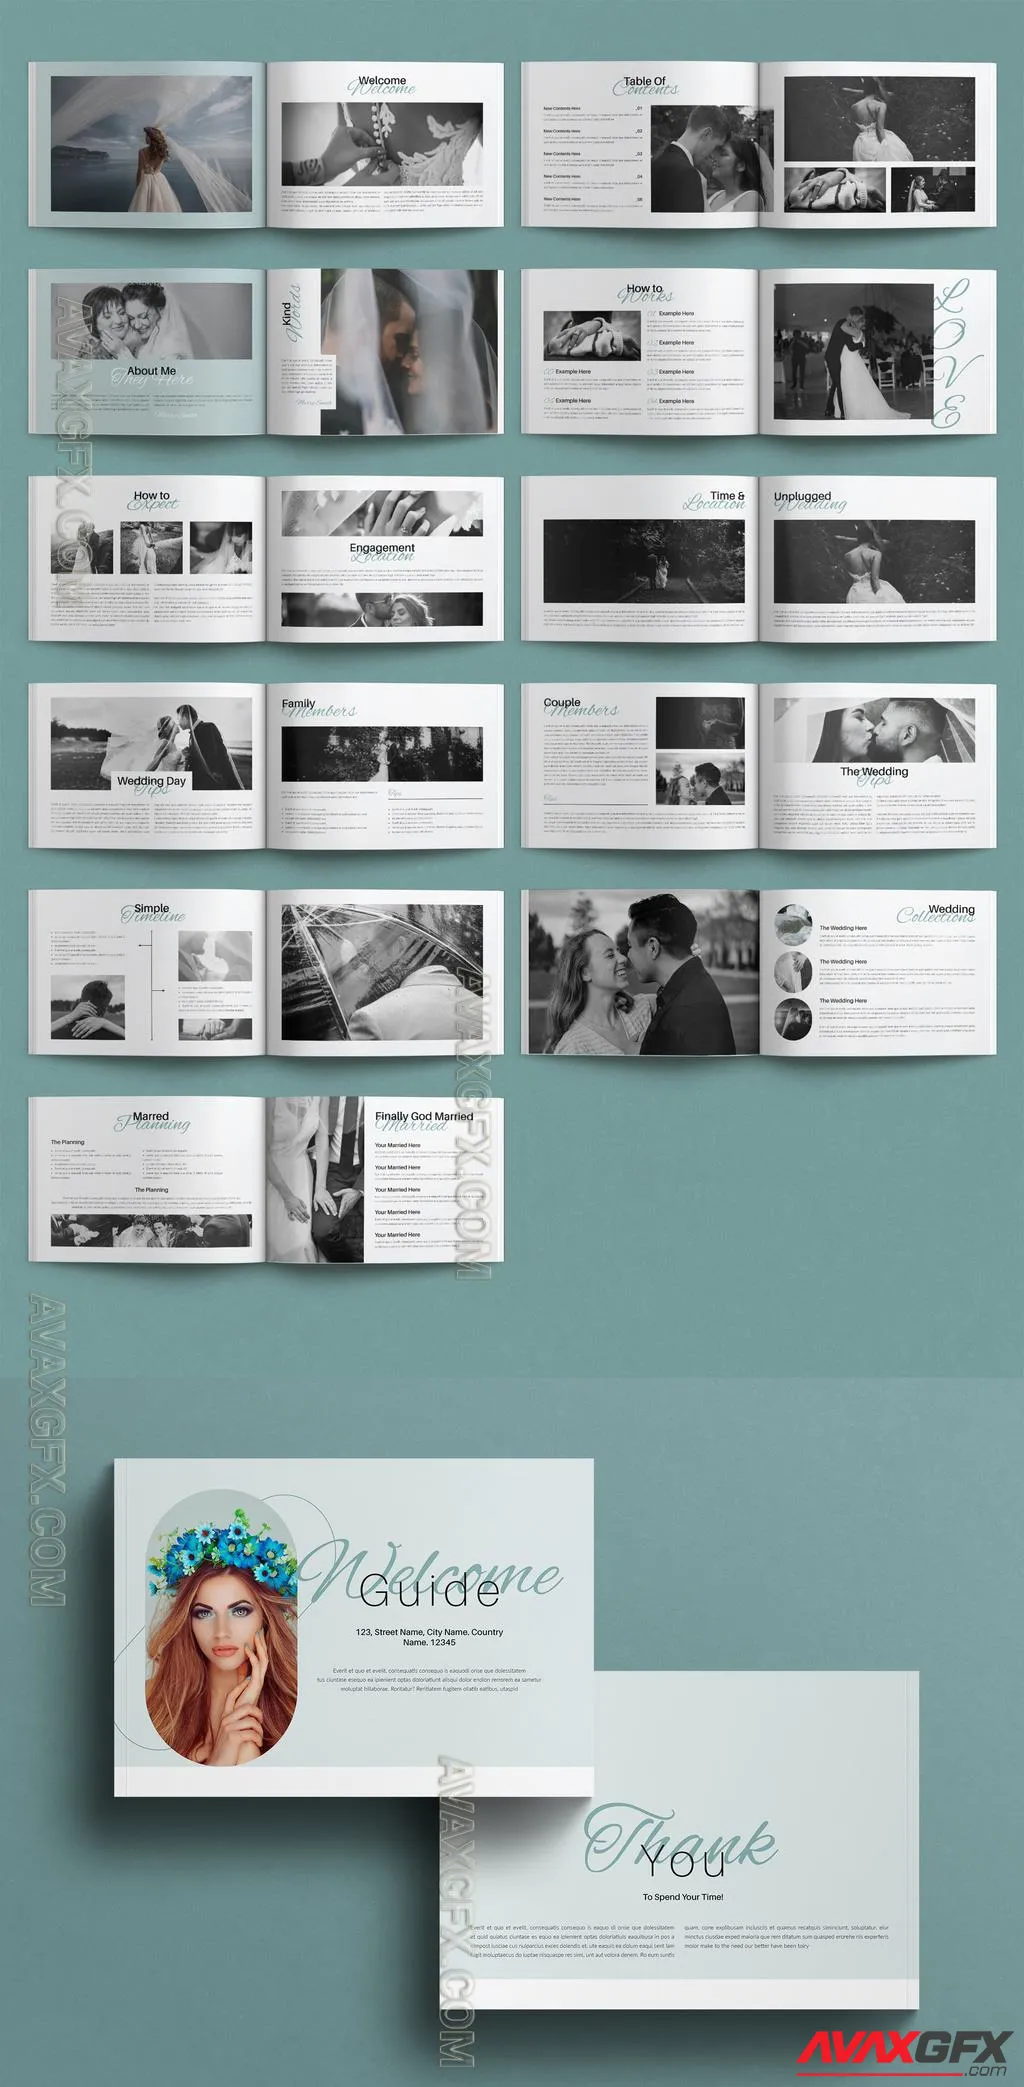 Adobestock - Welcome Guide Template Magazine Layout Landscape 755491507